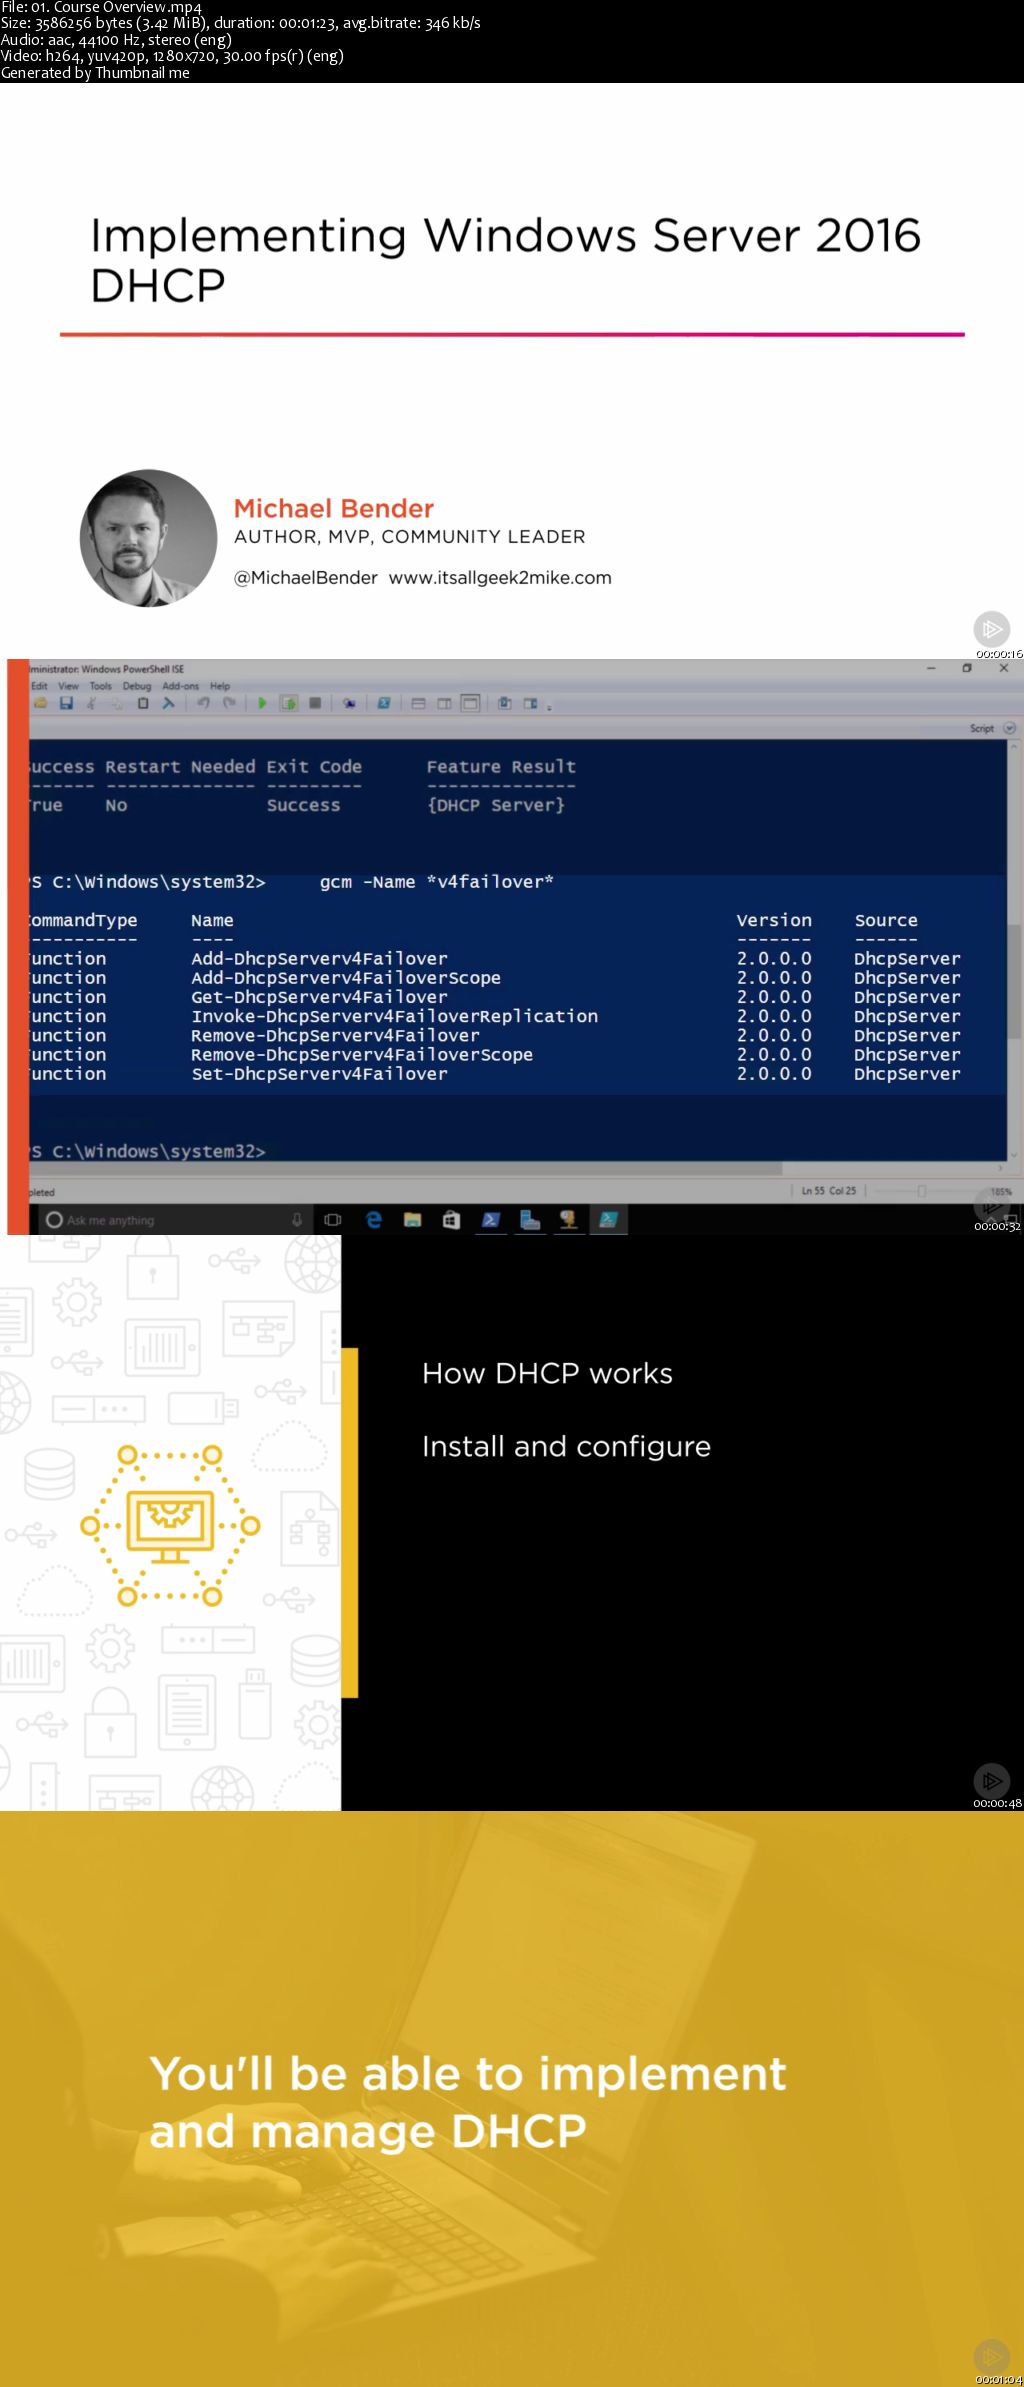 Implementing Windows Server 2016 DHCP (complete)